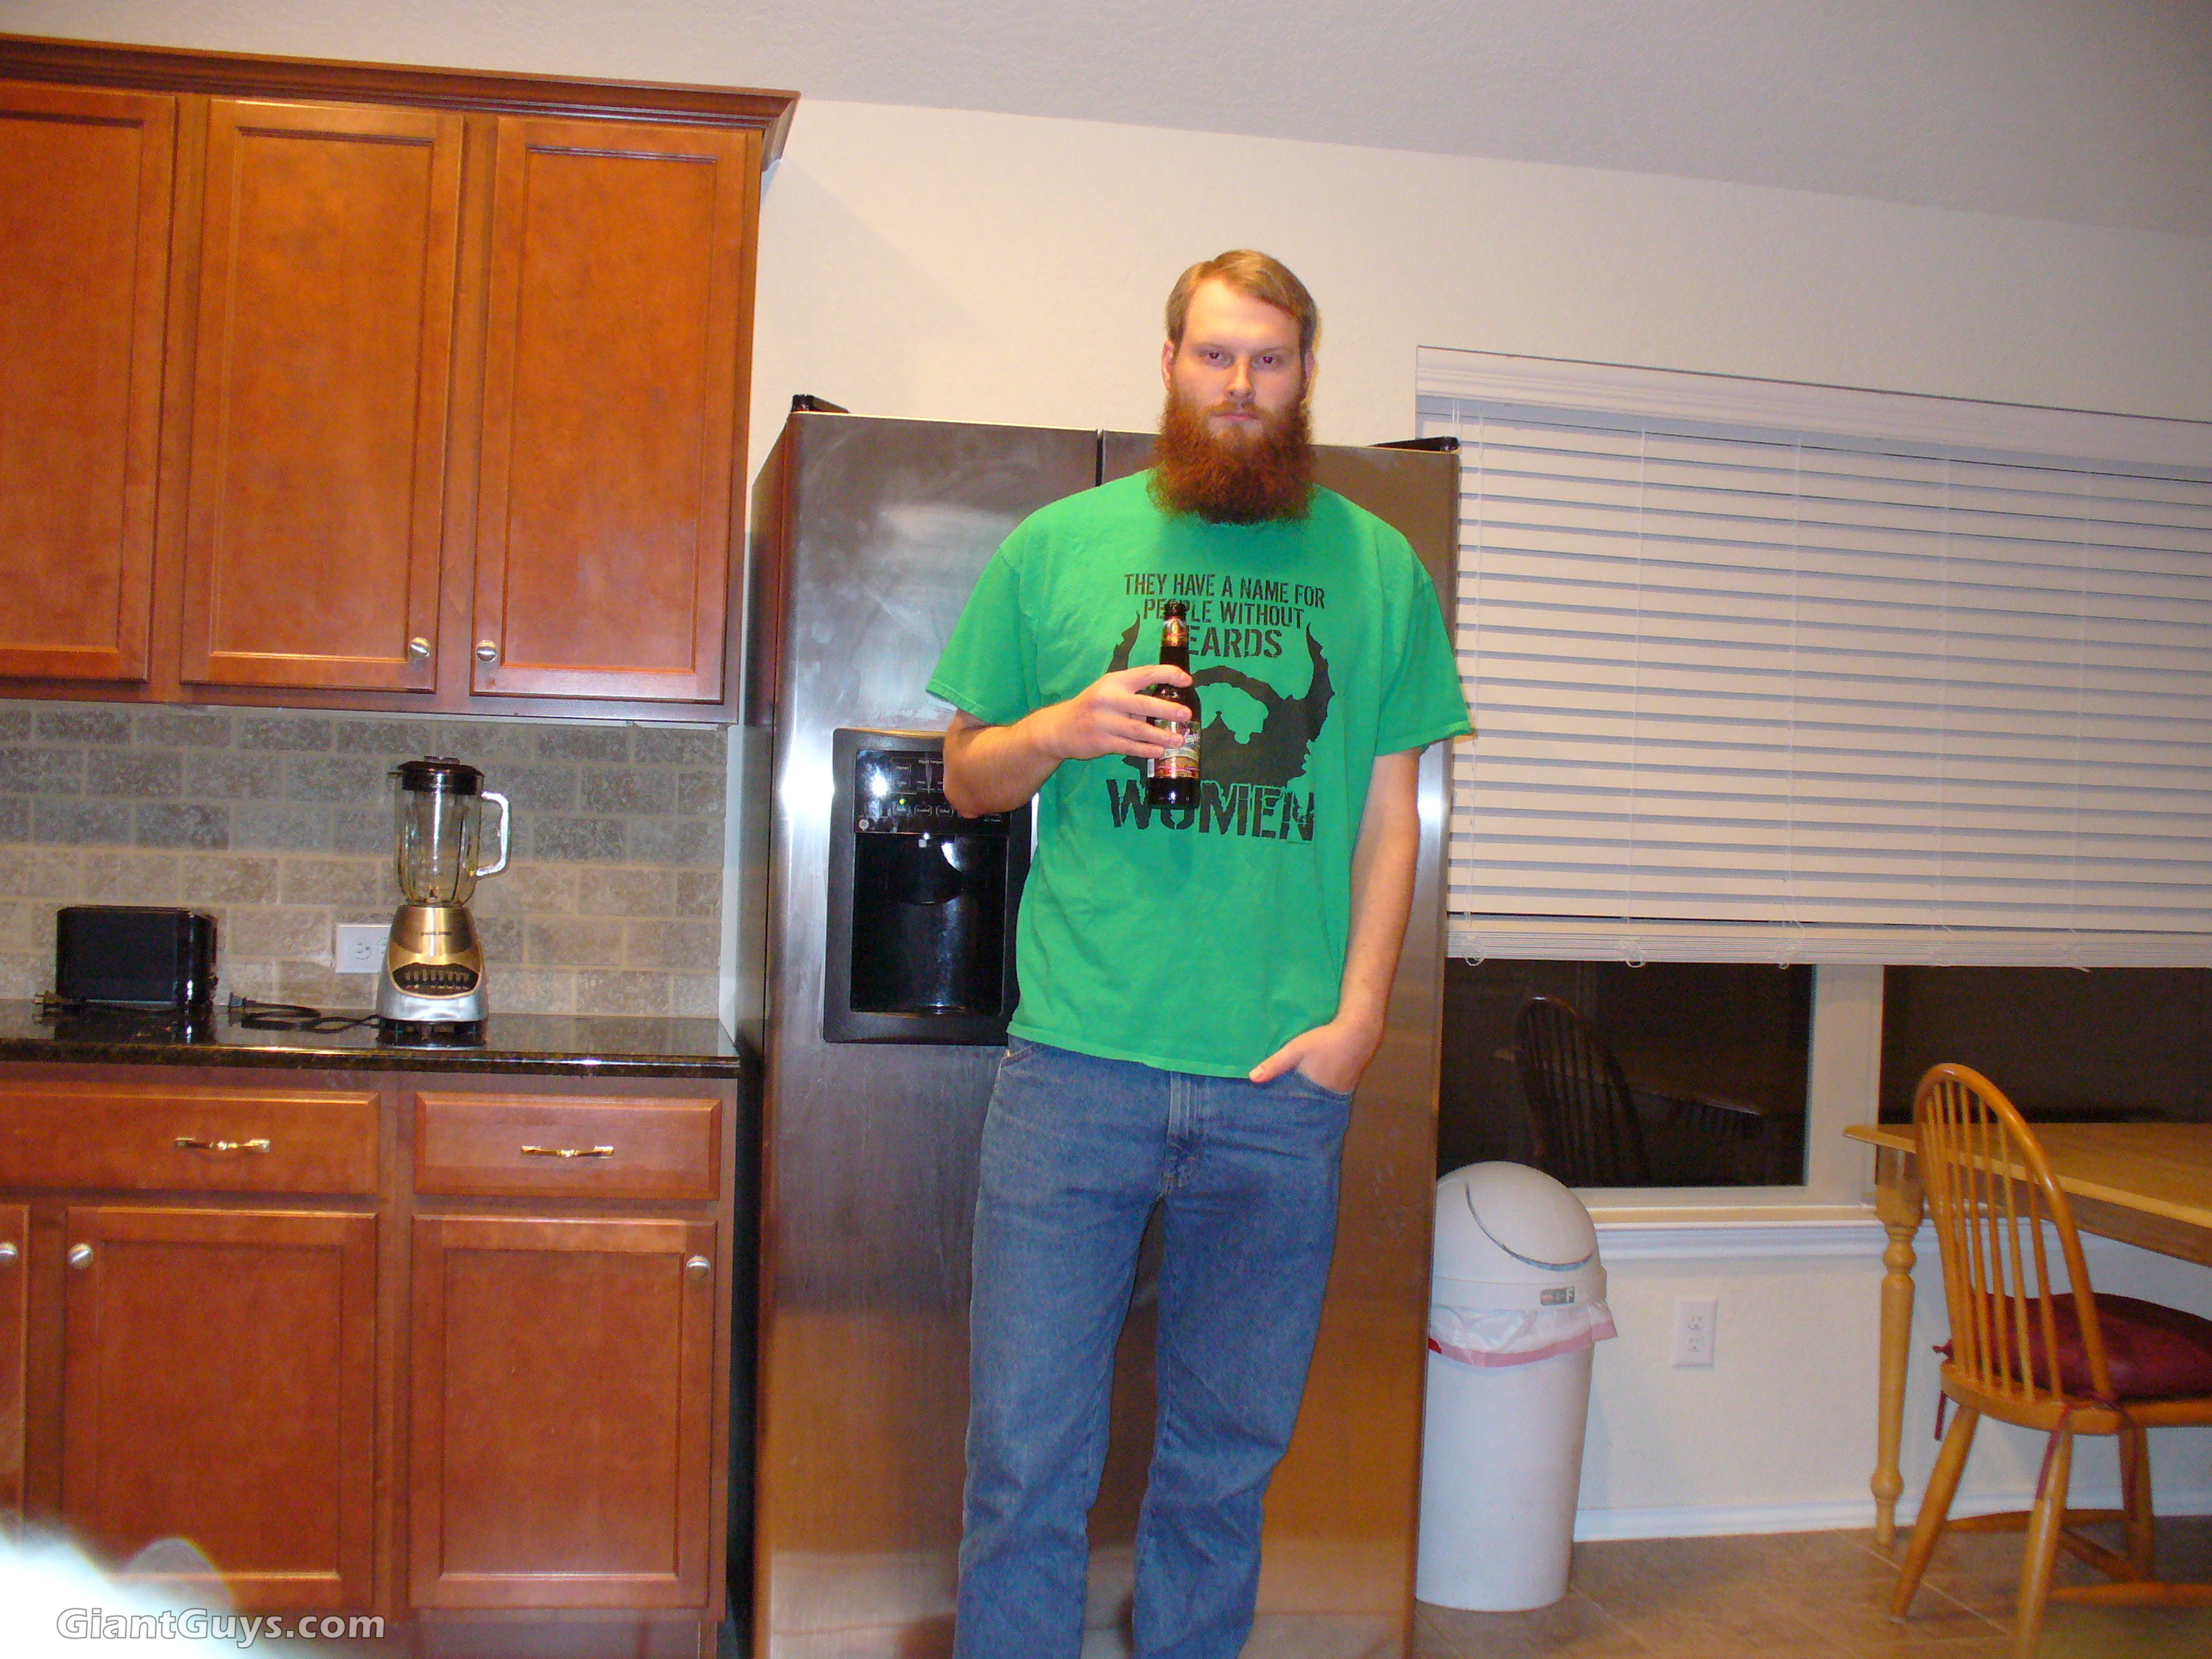 Have you dwarfed your refrigerator lately 6'5